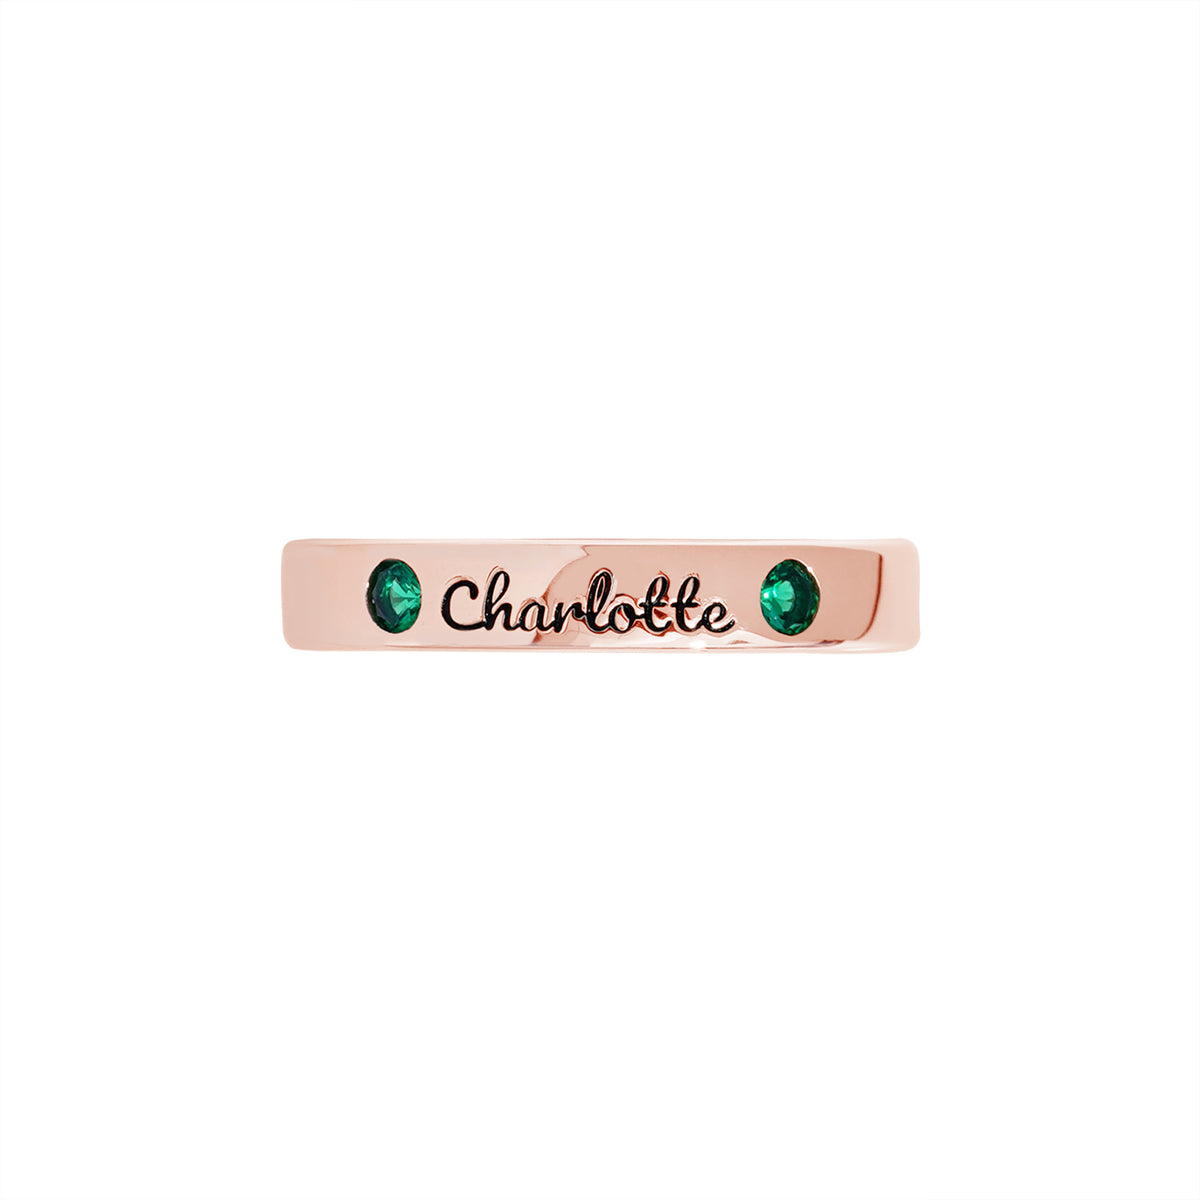 Personalized Name Ring with Birthstones